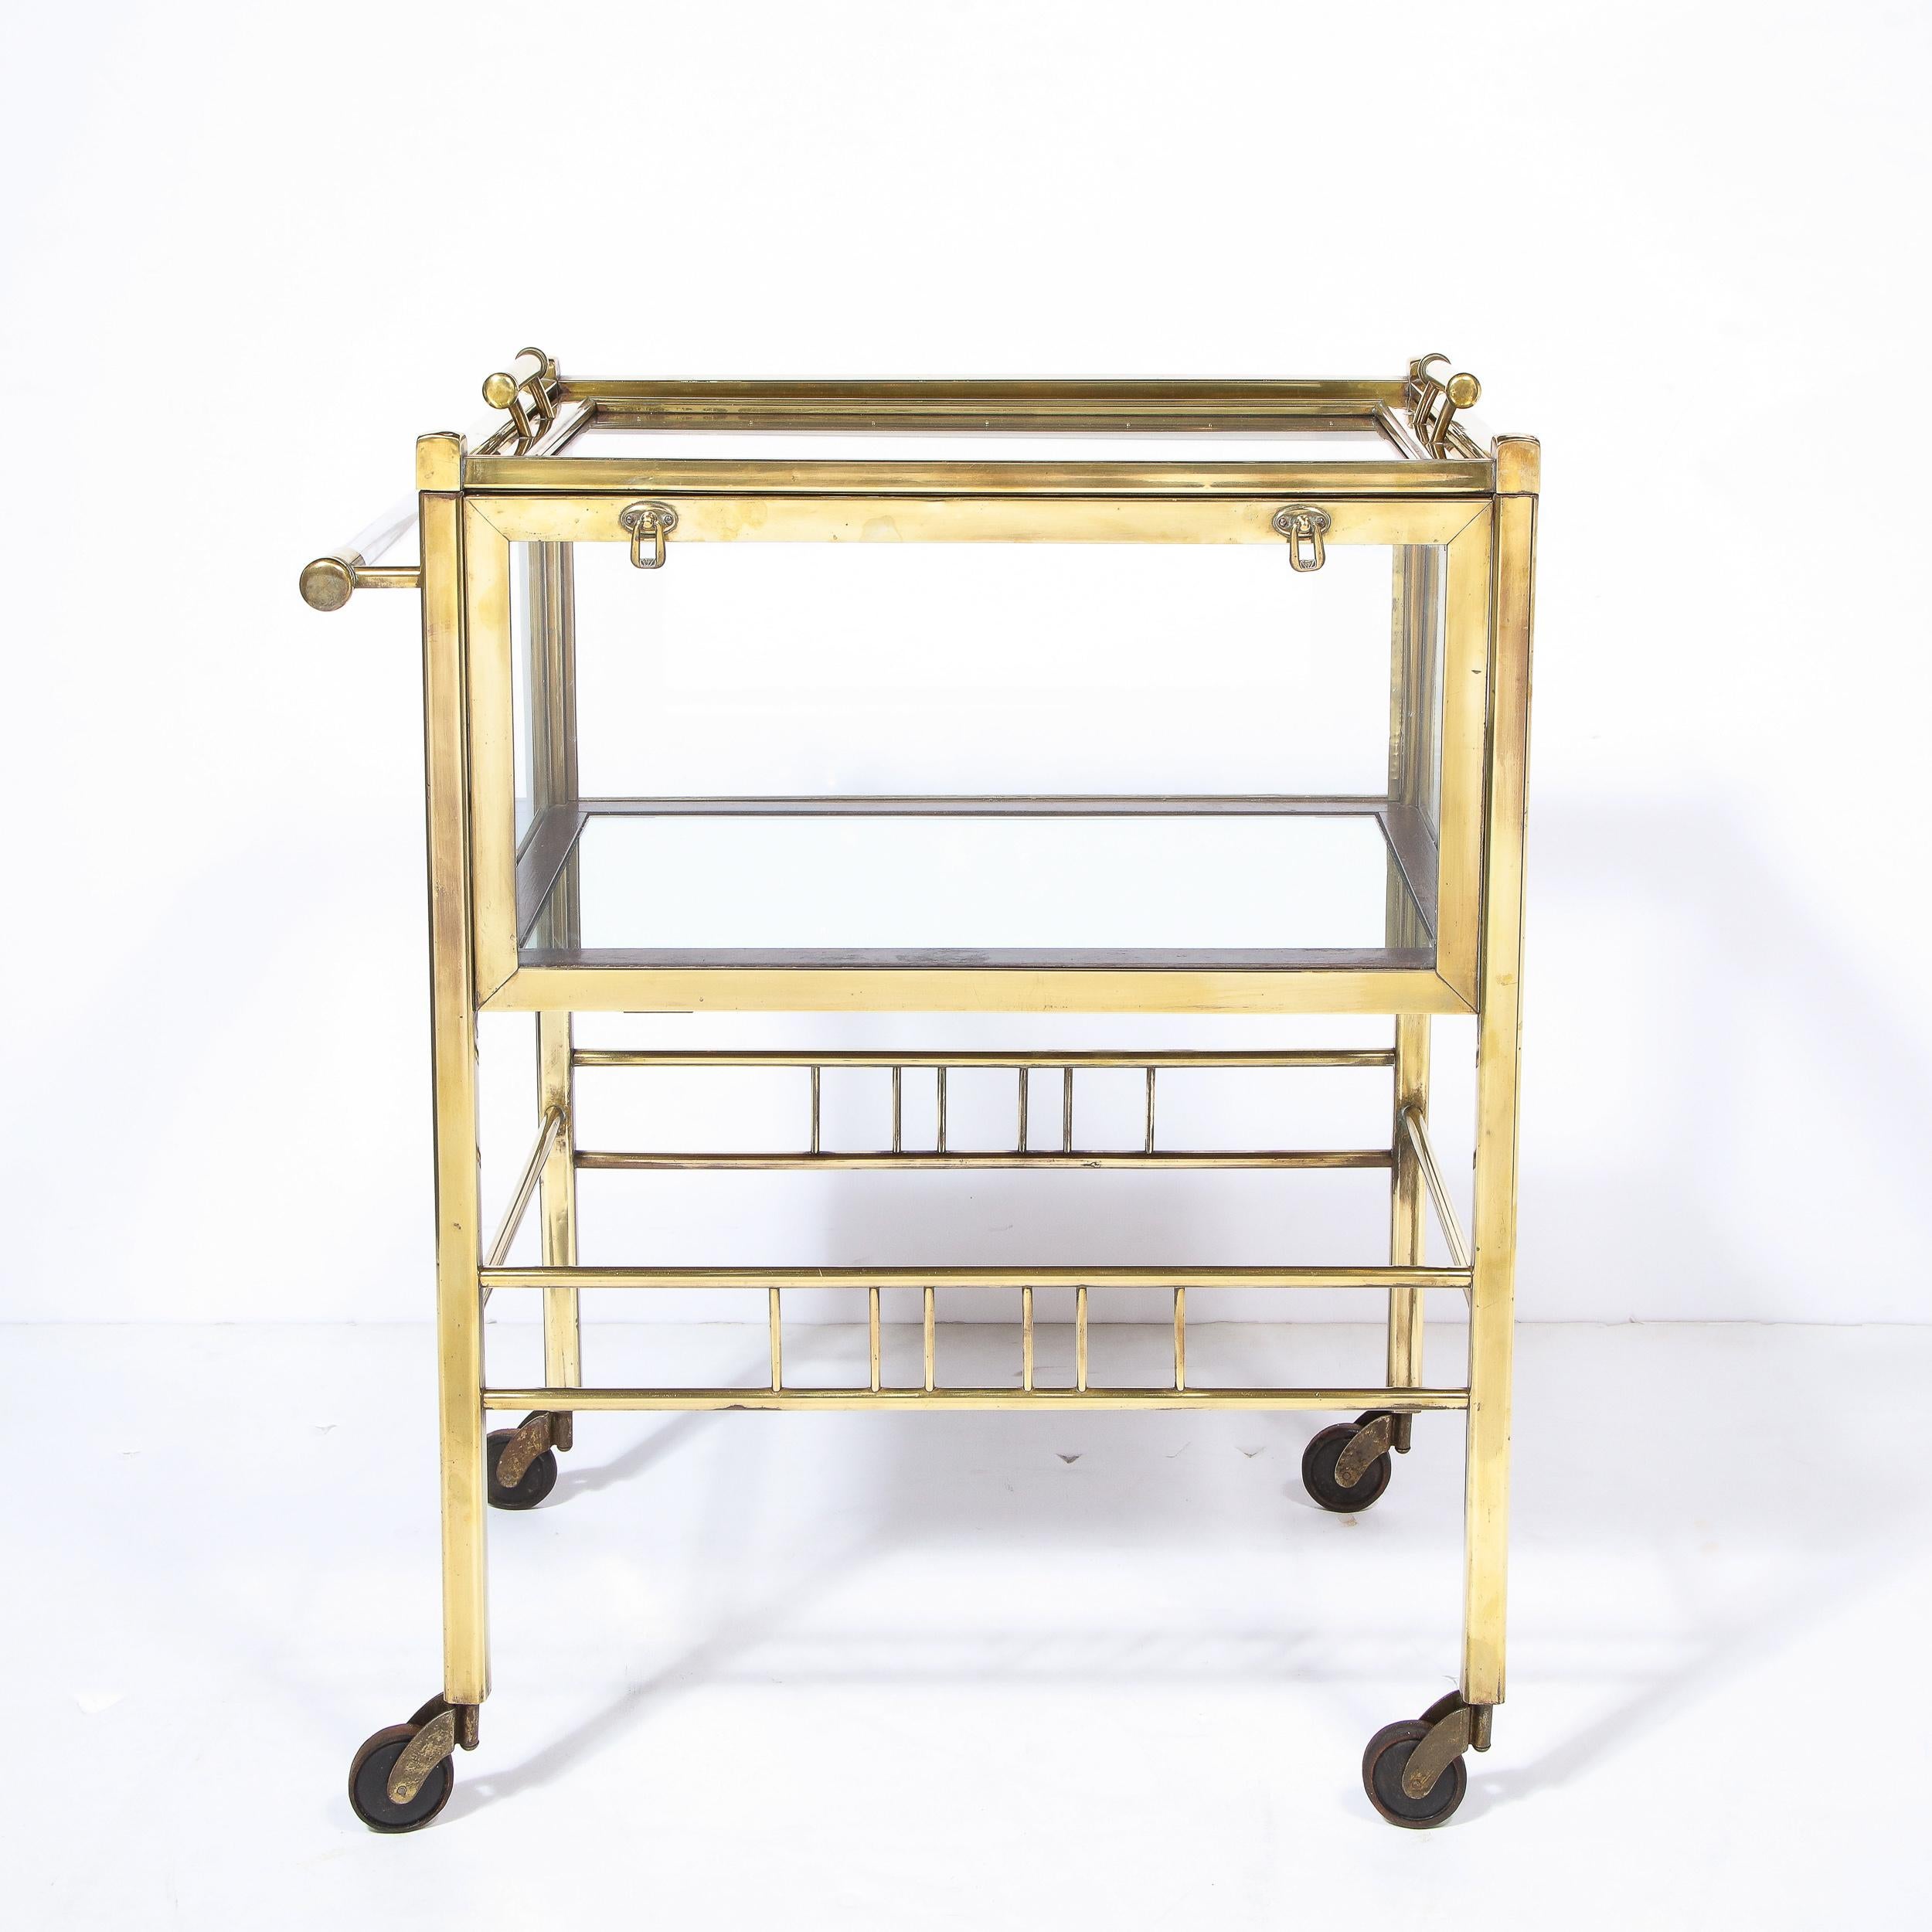 This stunning Art Deco bar cart was realized in Germany, circa 1925. Composed of lustrous polished brass, it offers a volumetric rectangular body with two tiers of translucent glass; a removable top with two cylindrical brass handles; and a bottom